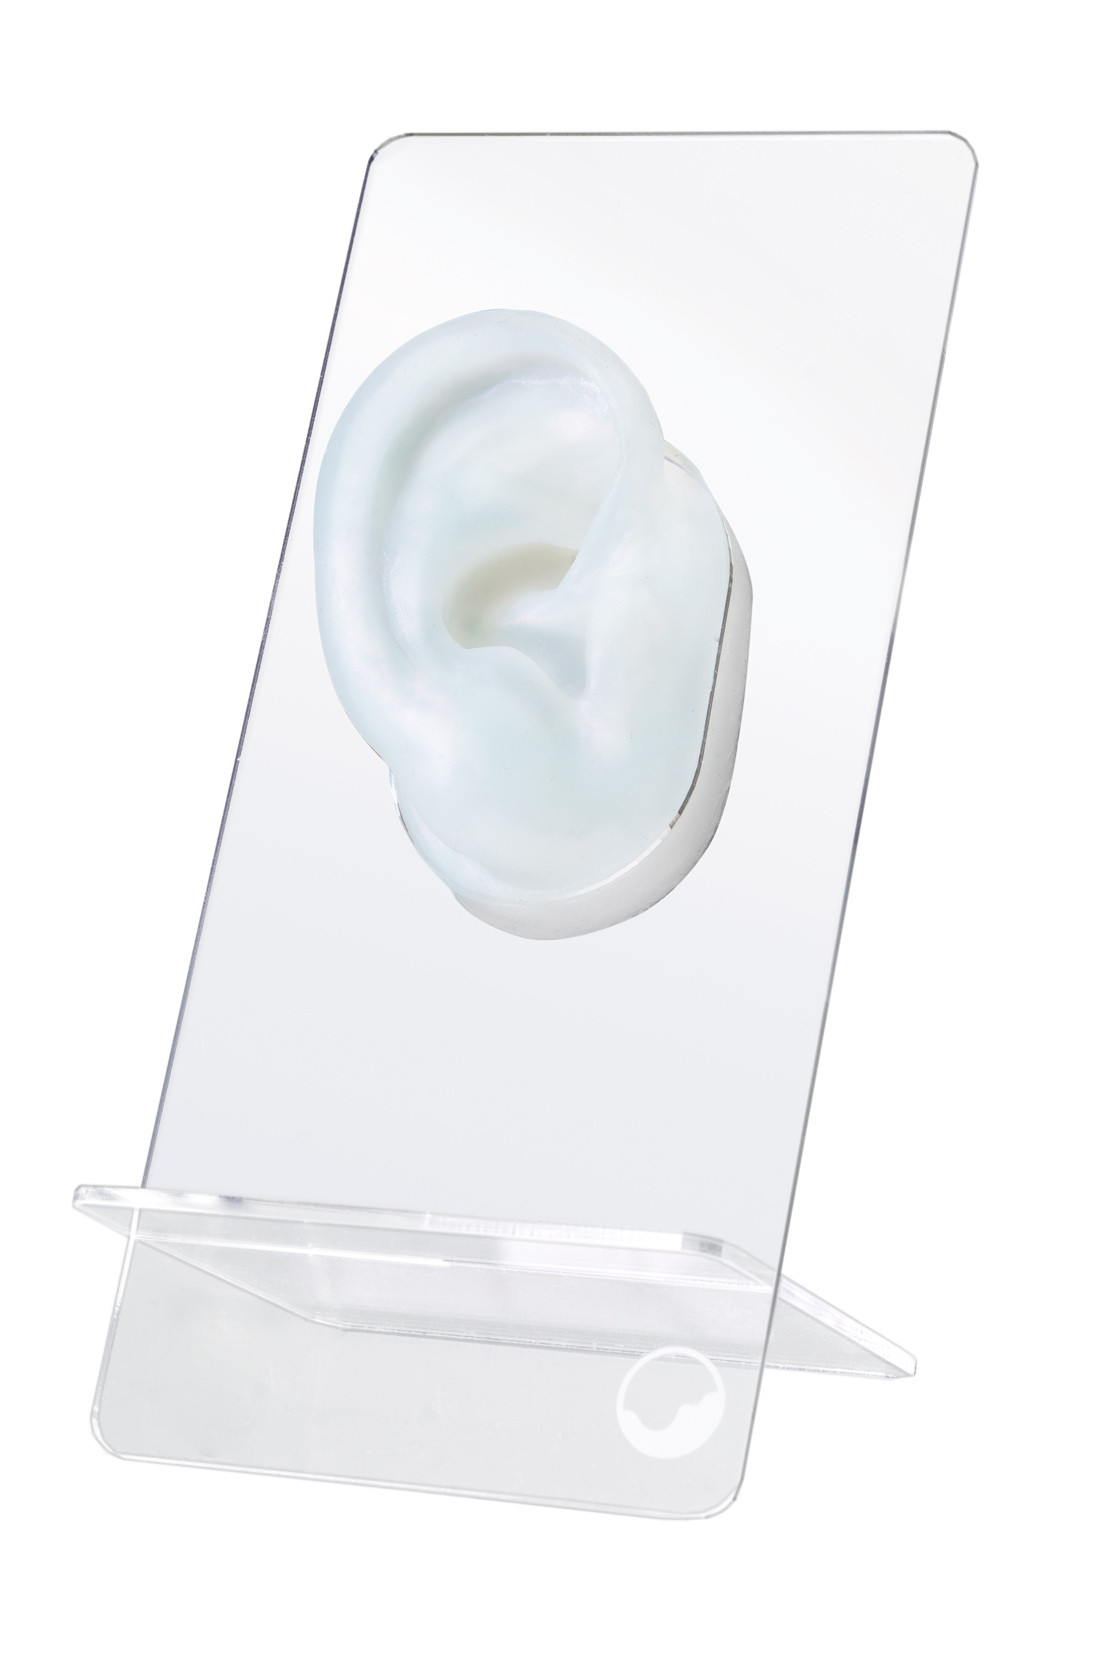 Demo-ear, right, with magnet incl. display, color pearl